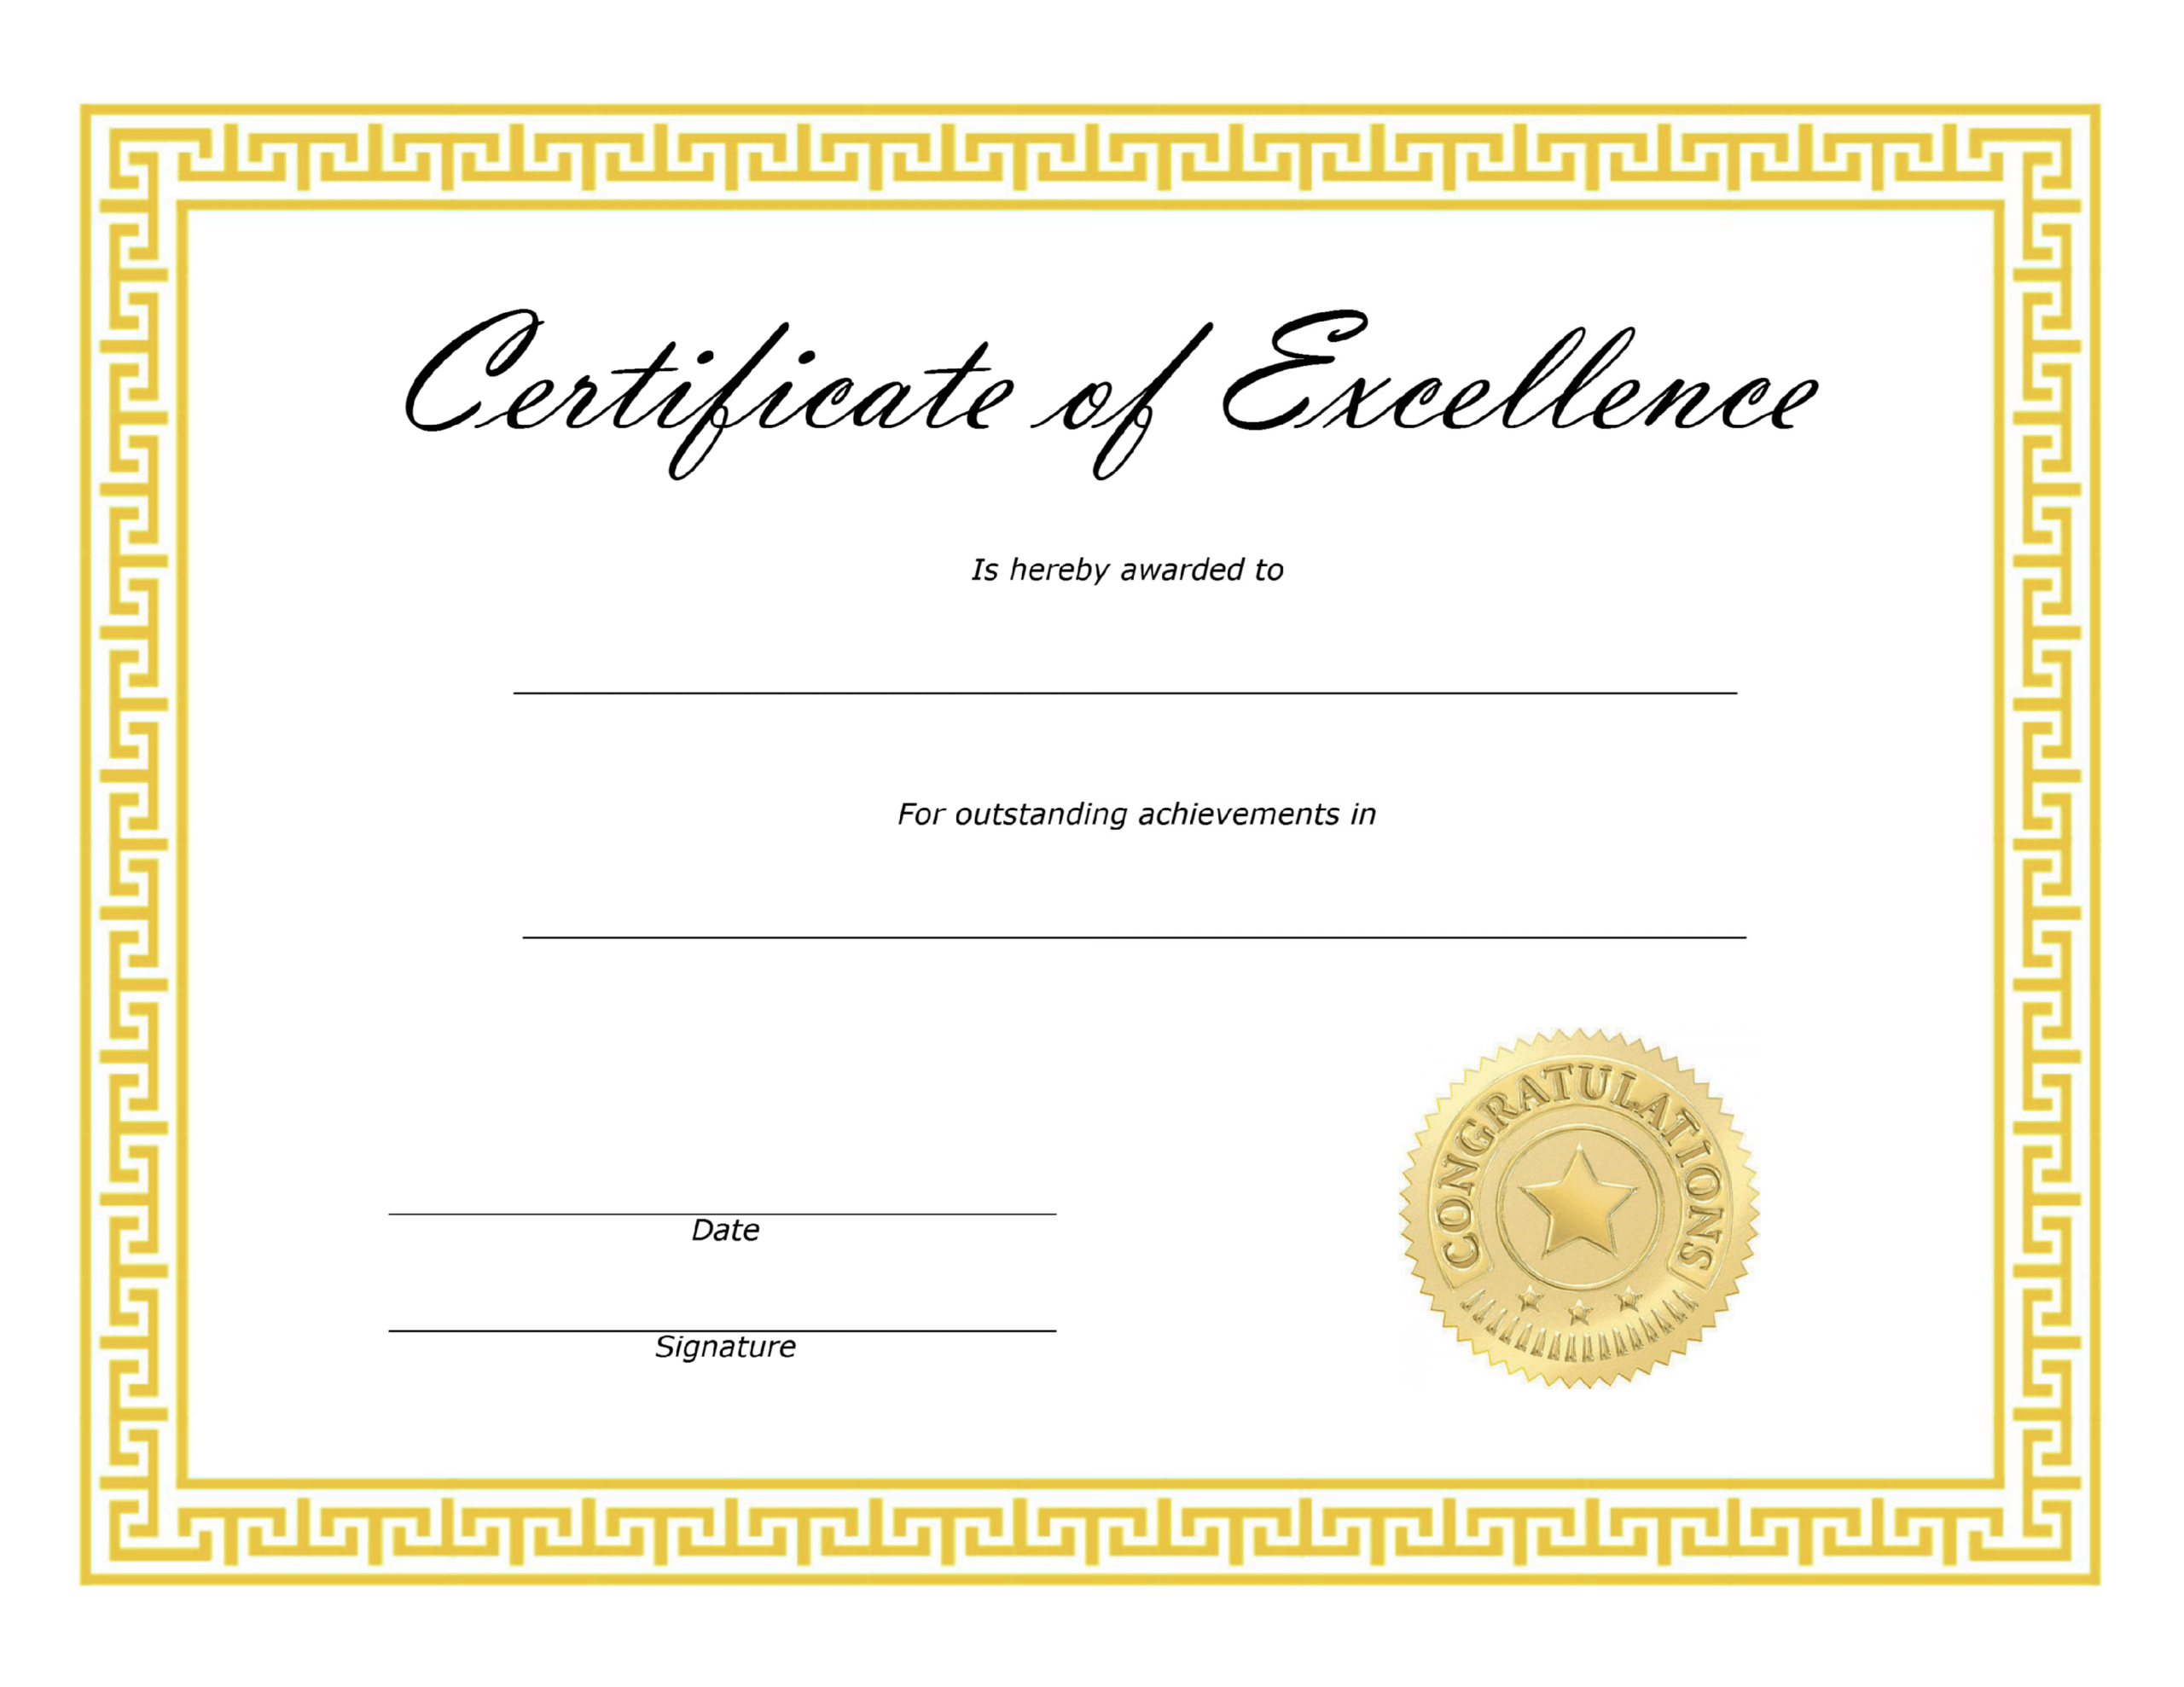 ❤️ Free Sample Certificate Of Excellence Templates❤️ Throughout Certificate Of Excellence Template Free Download